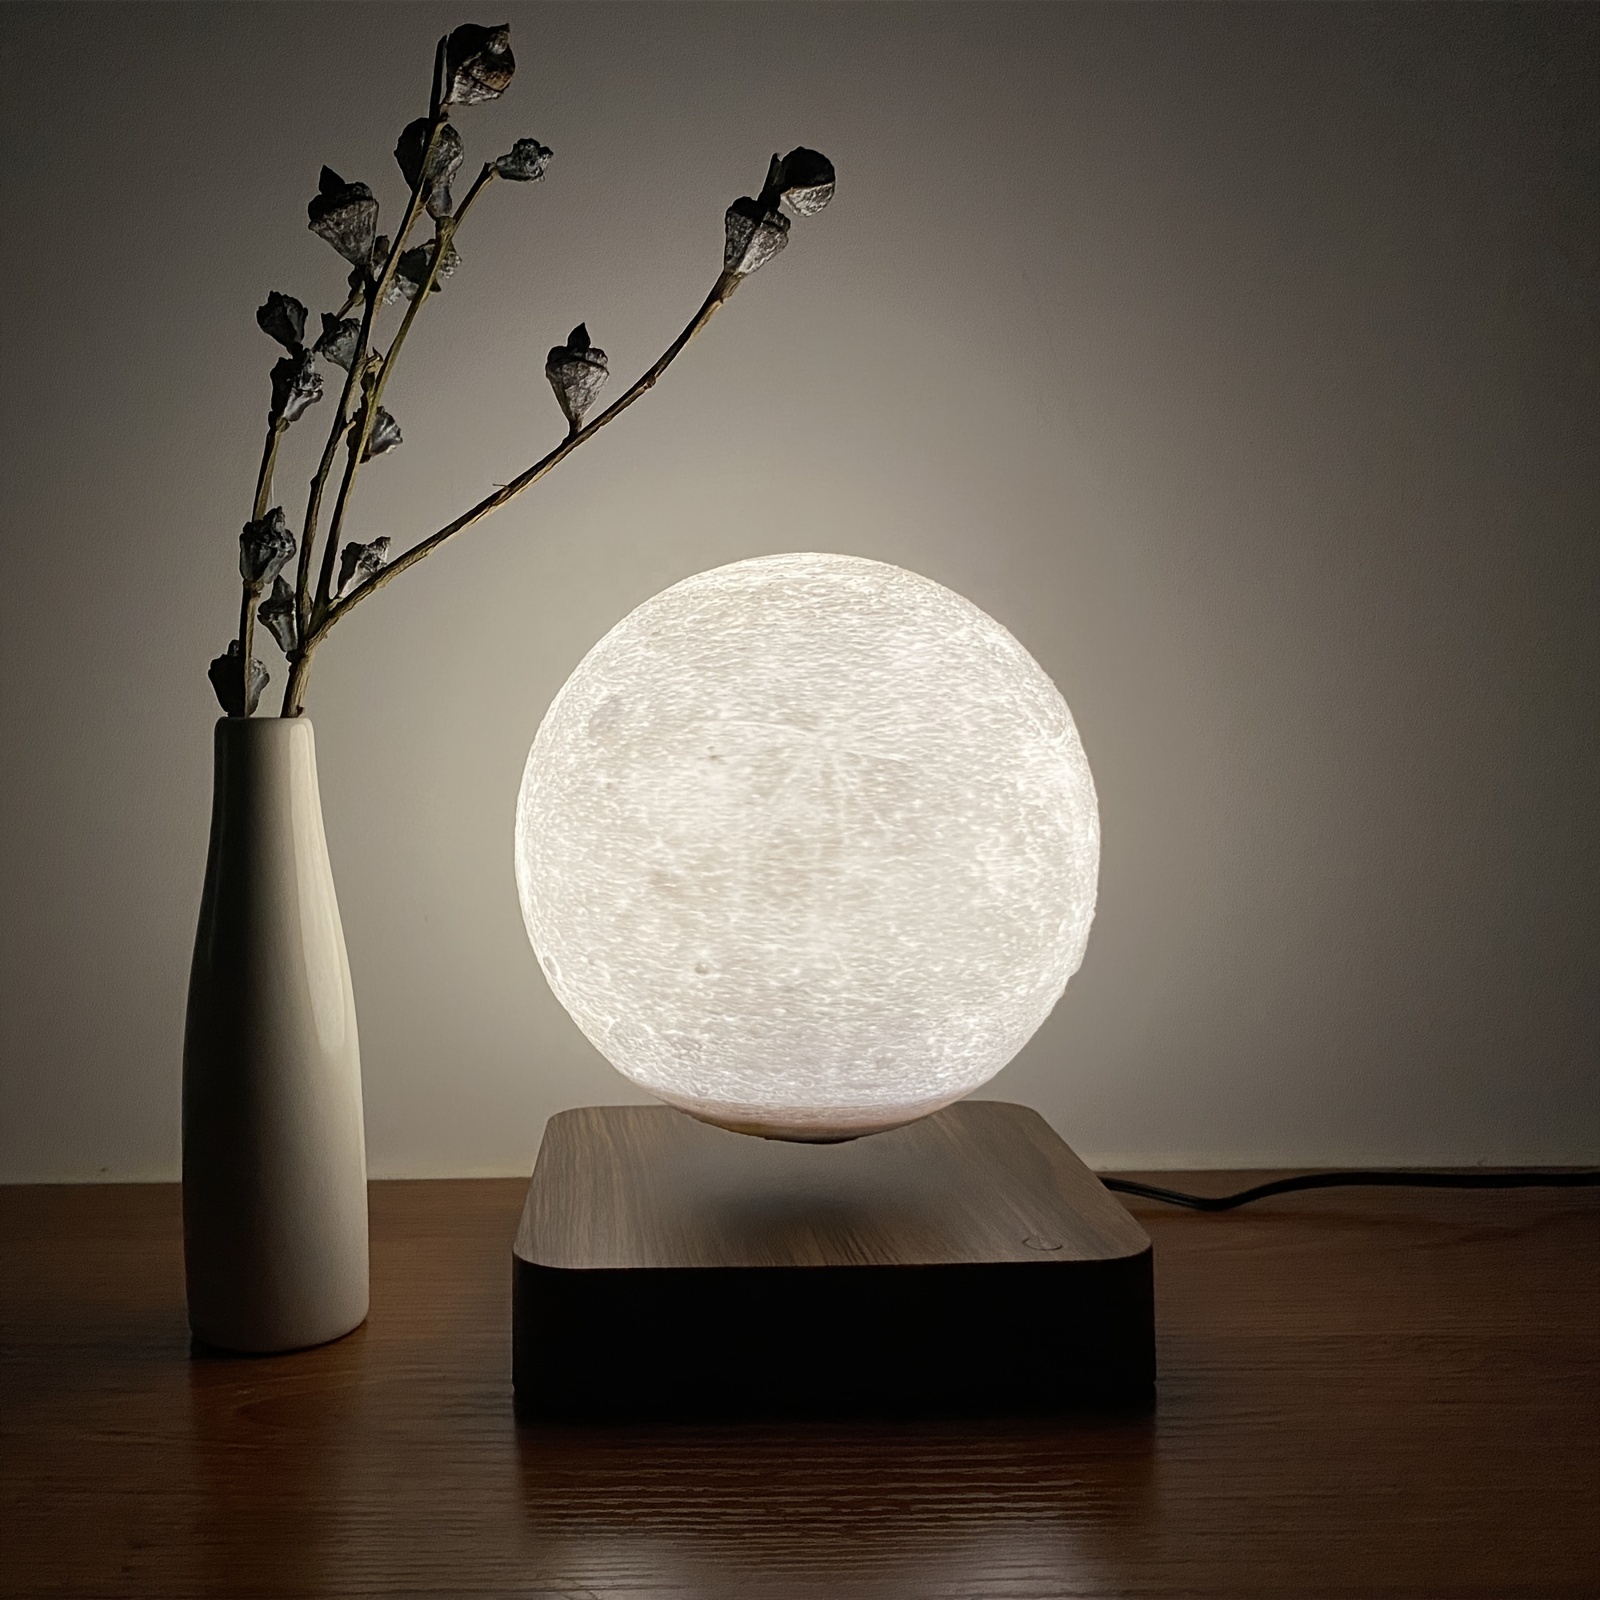 1pc levitating moon table lamp magnetic floating night light with 3 lighting modes 3d printed levitation bedside table lamp for office bedroom home decoration details 3